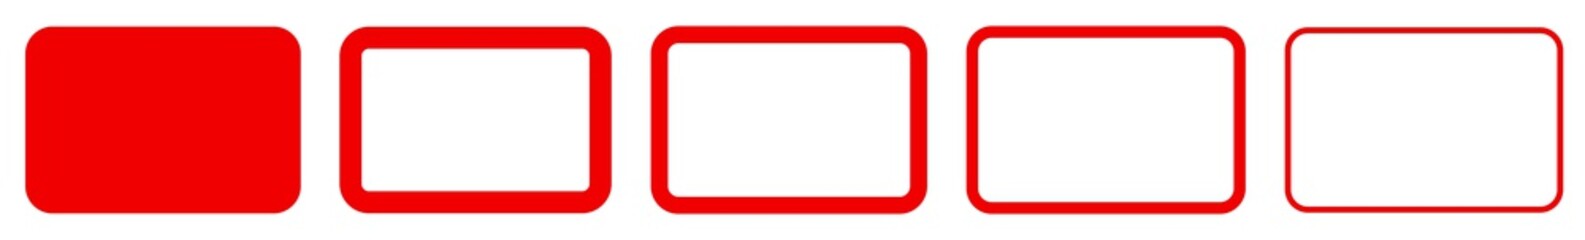 Rectangle Icon Red | Rounded Rectangles | Blank Box Symbol | Empty Frame Logo | Button Sign | Isolated | Variations